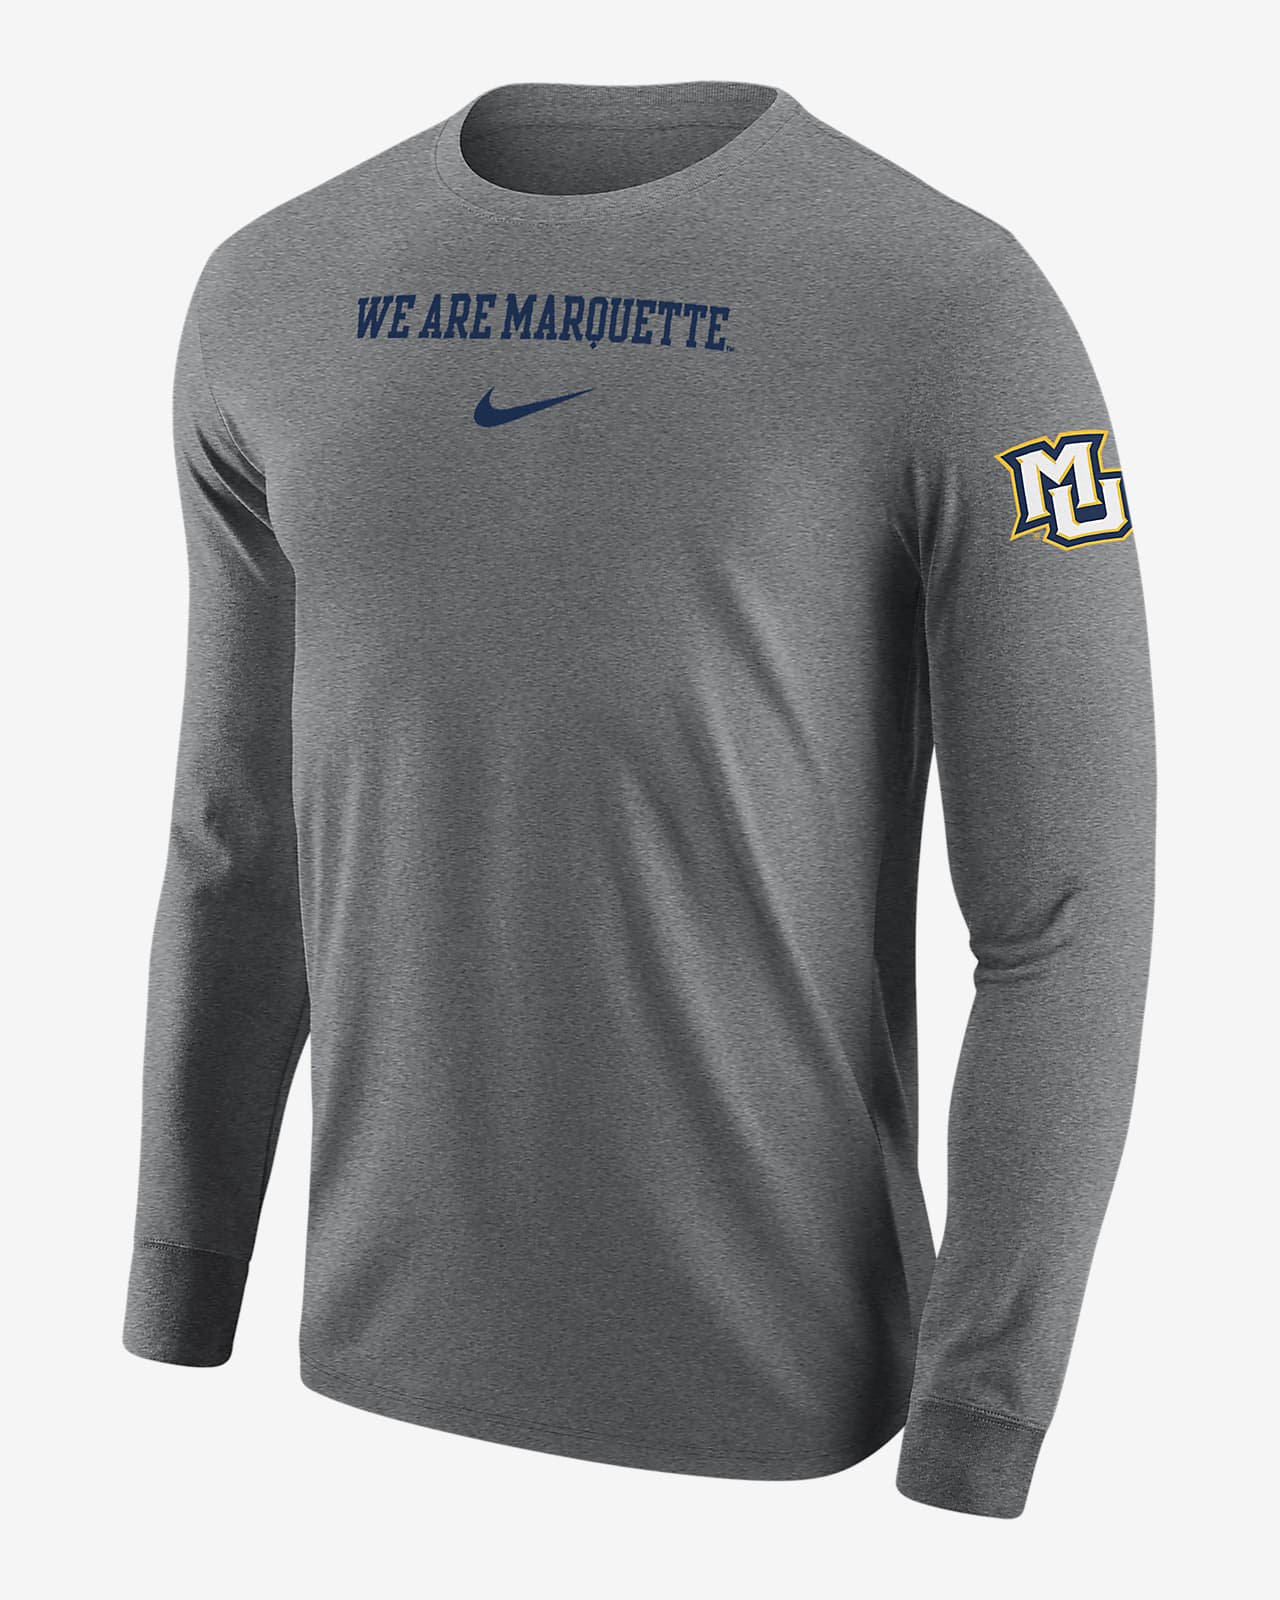 Marquette Men's Nike College Long-Sleeve T-Shirt